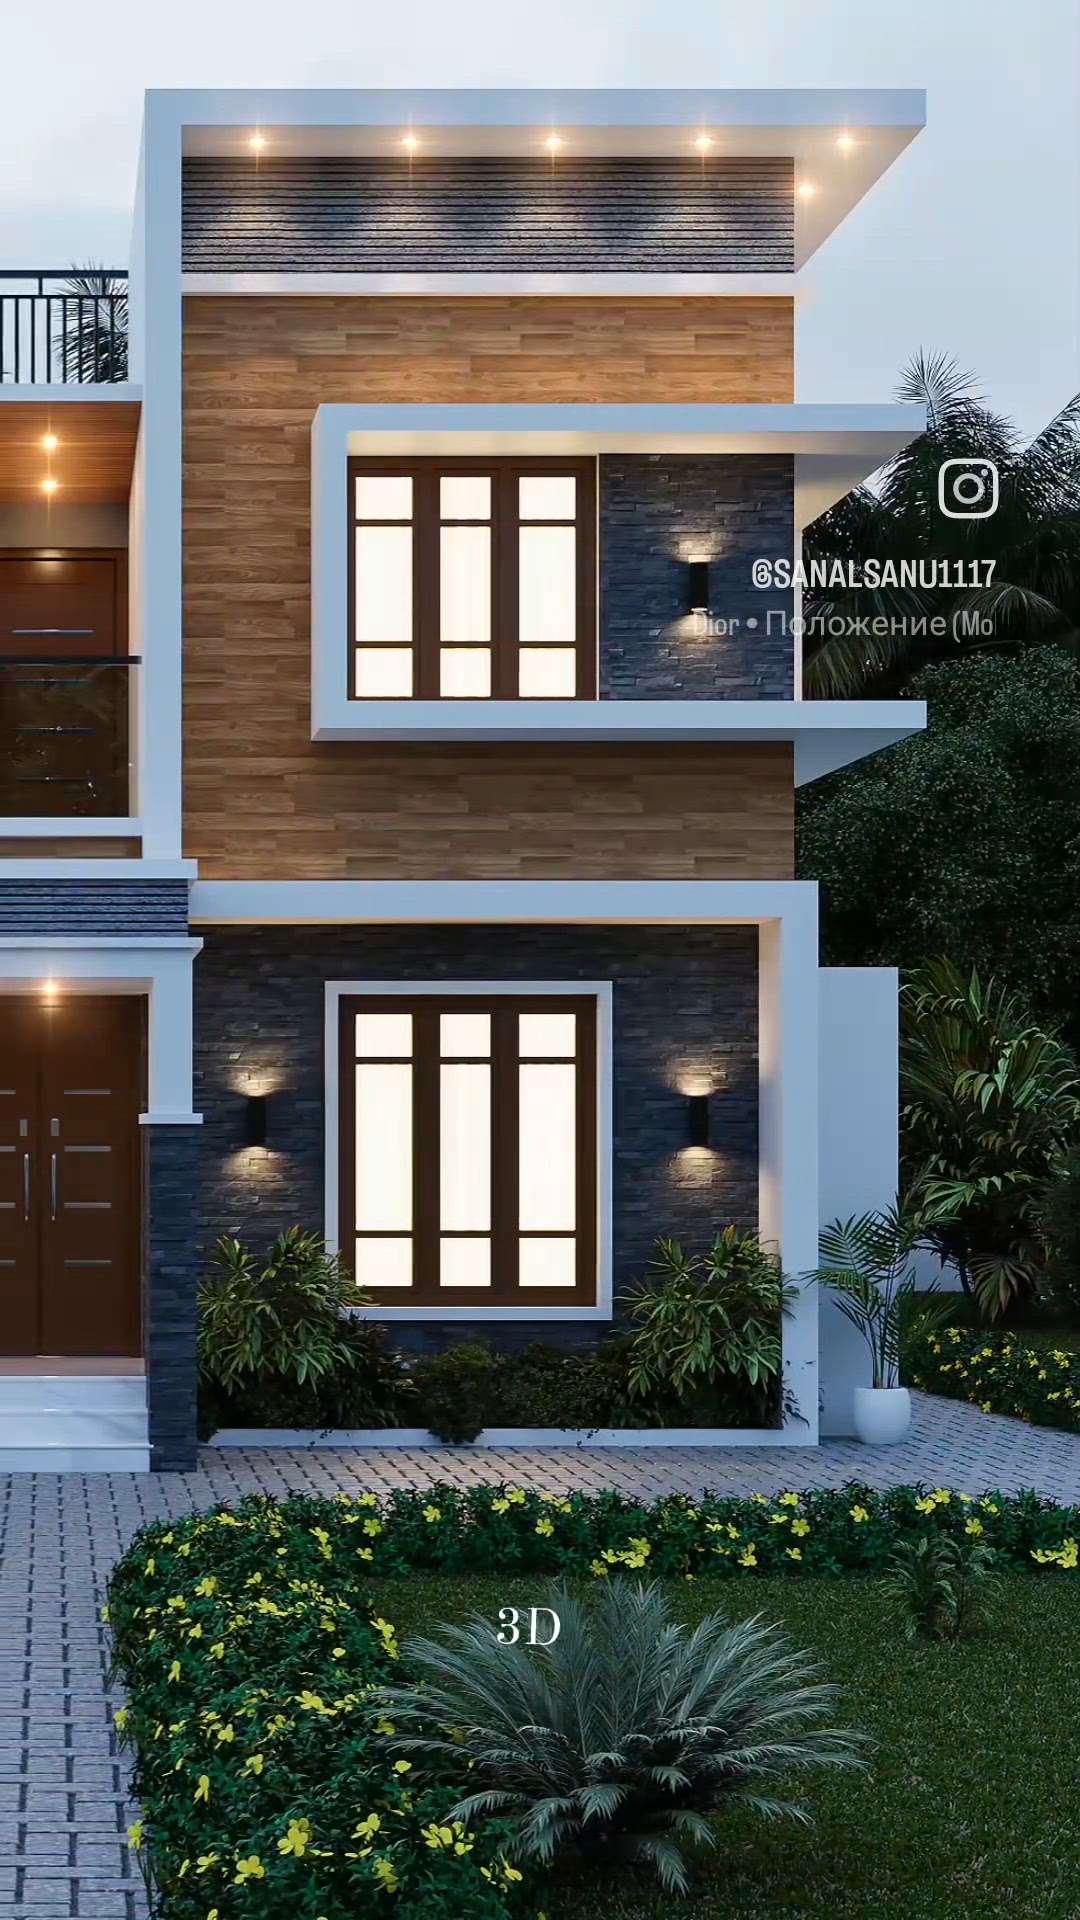 We Provide........ 

3D Elevation
3D interior
3D Plan
3D Landscapeing
2D Plan
Plan Approval
Completion Drawing
General Drawings 

Contact Us By 9539215017....
#3dvisualization
#3drender
#elevation
#homedesign
#keralahome
#contumprary home
#home design
#home interior
#dinning interior